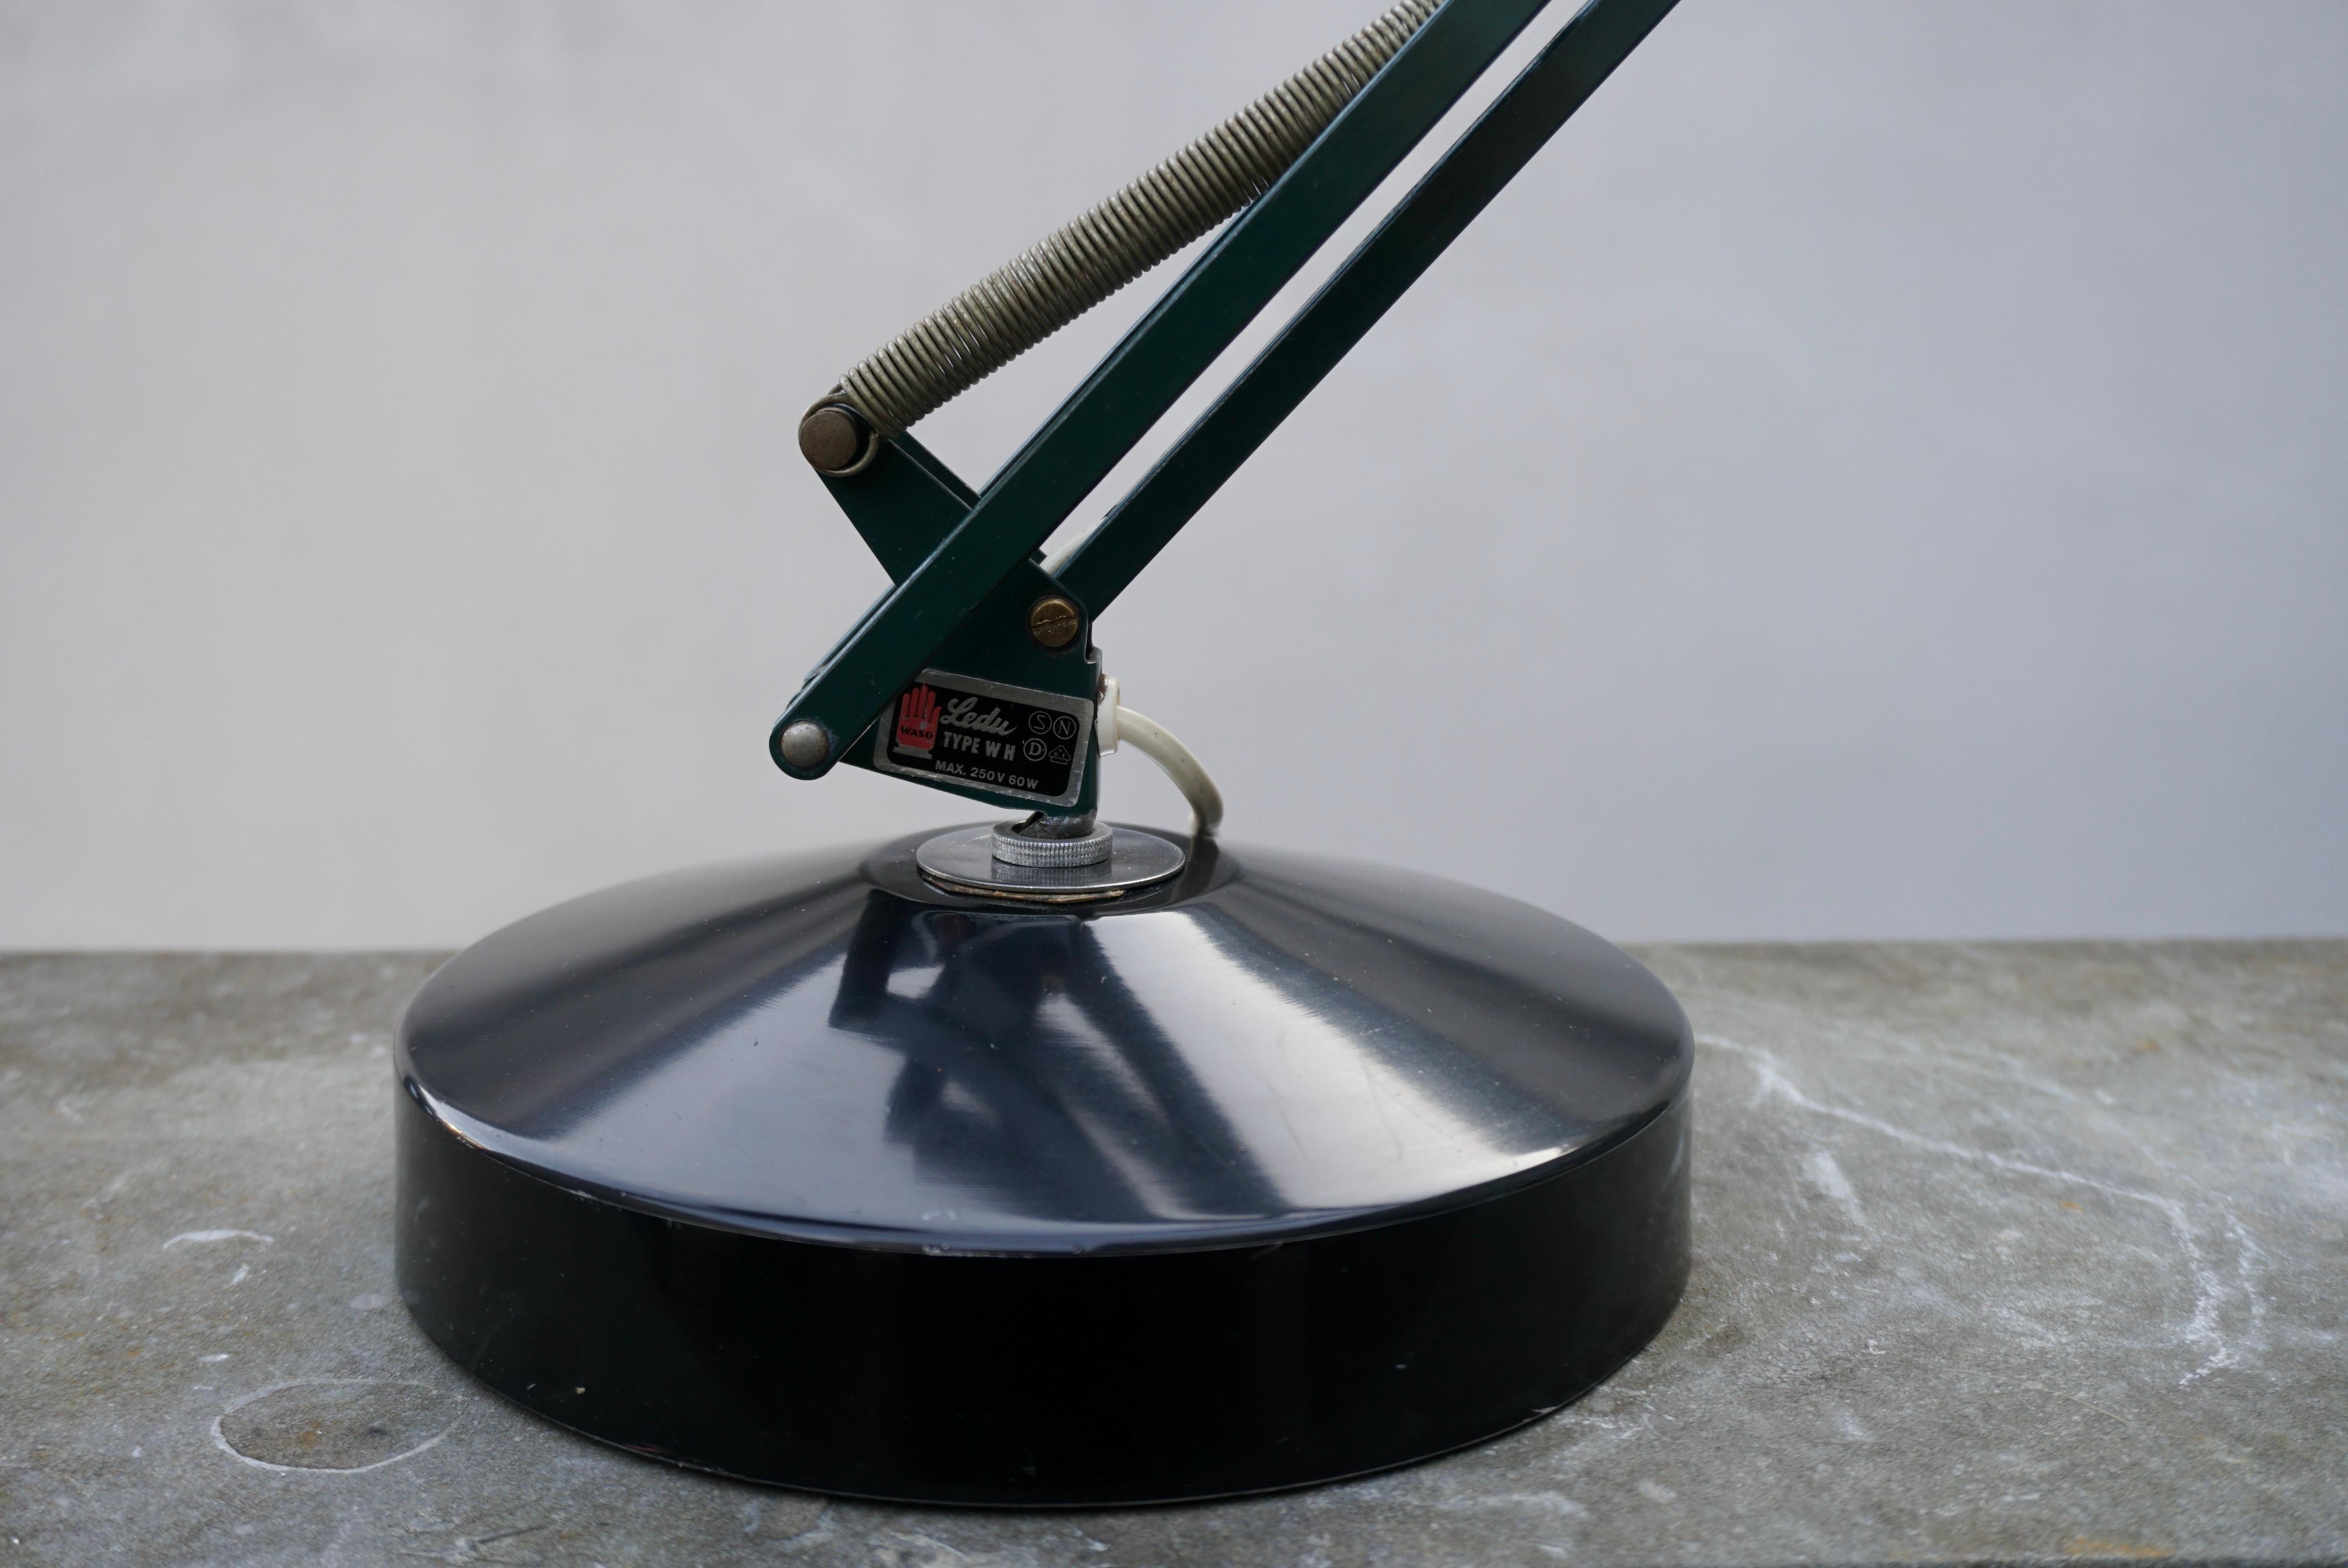 Industrial Office Architect Desk Lamp by Ledu, 1970s, Made in Sweden For Sale 10